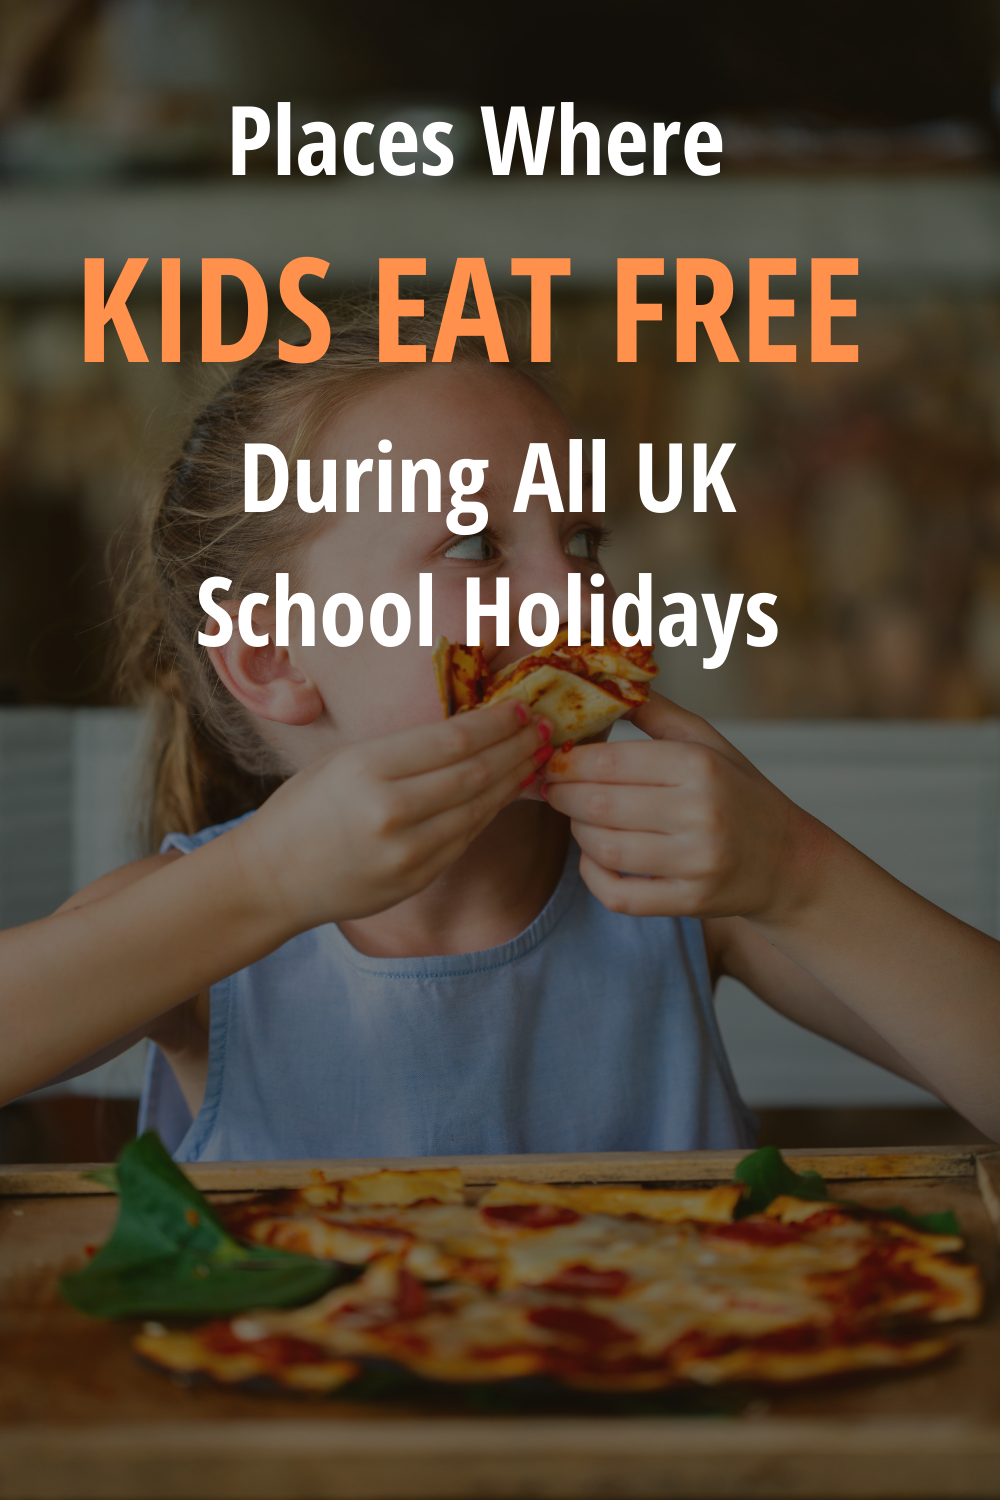 Places where Kids Eat Free During School Half Terms in 2022